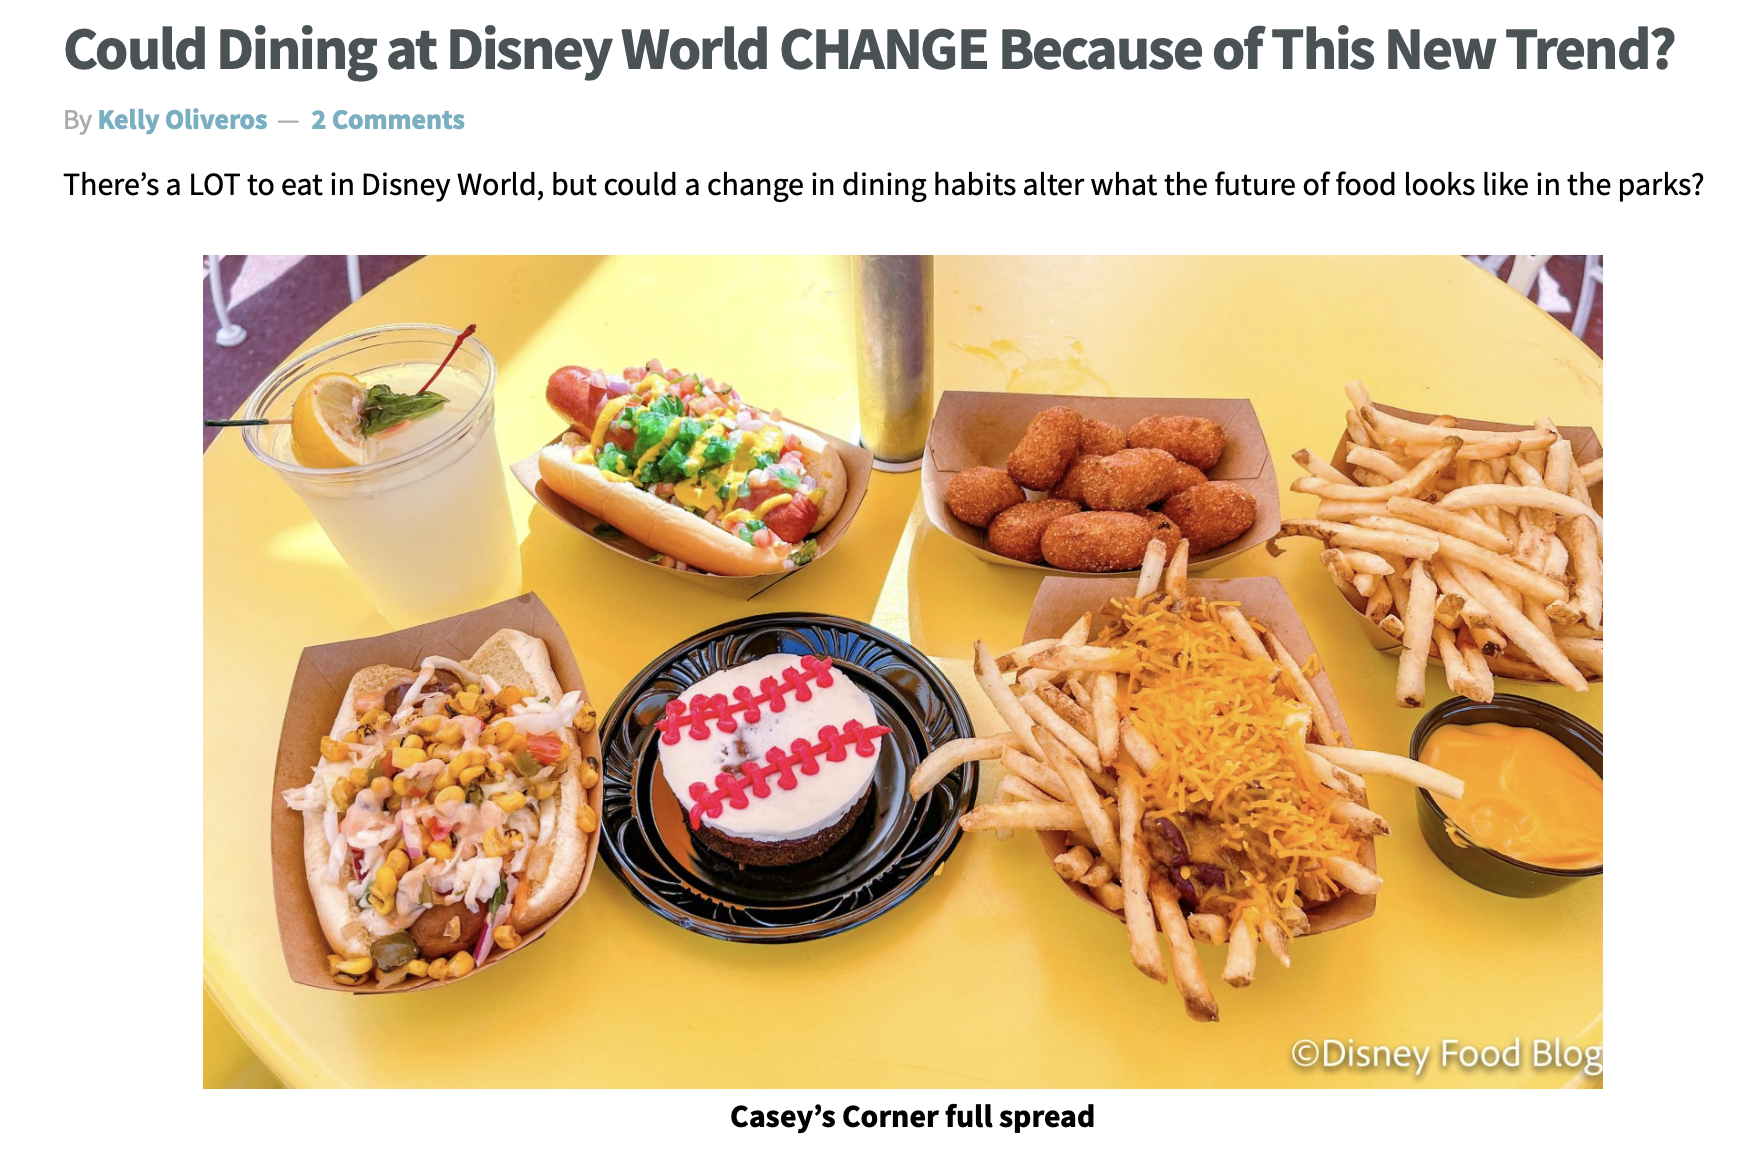 Could Dining at Disney World CHANGE Because of This New Trend?